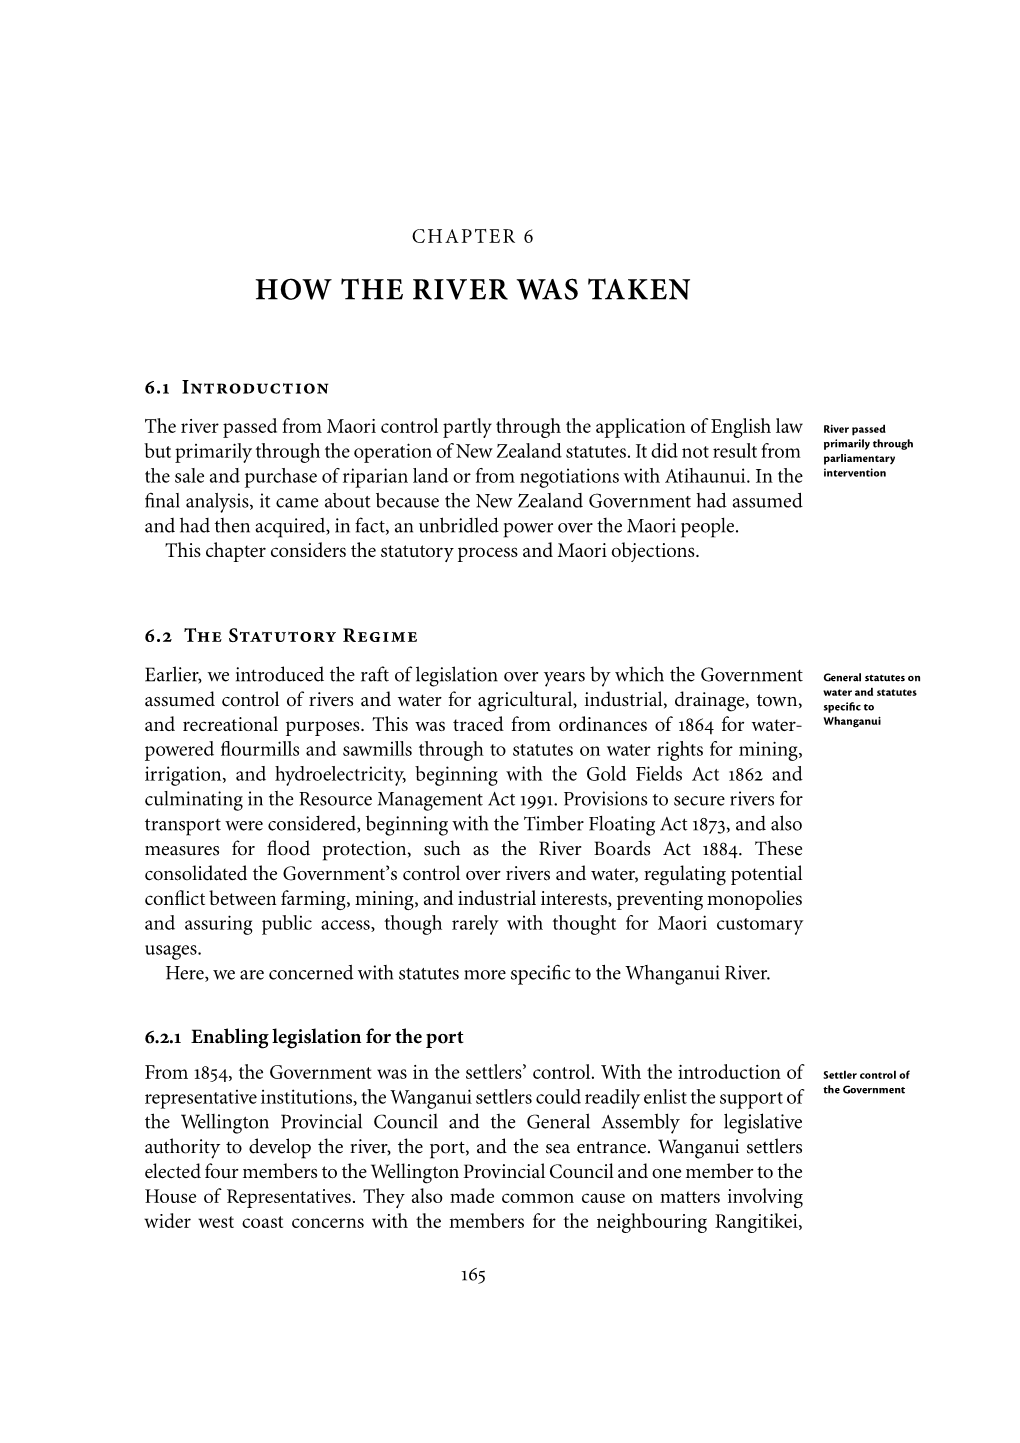 How the River Was Taken